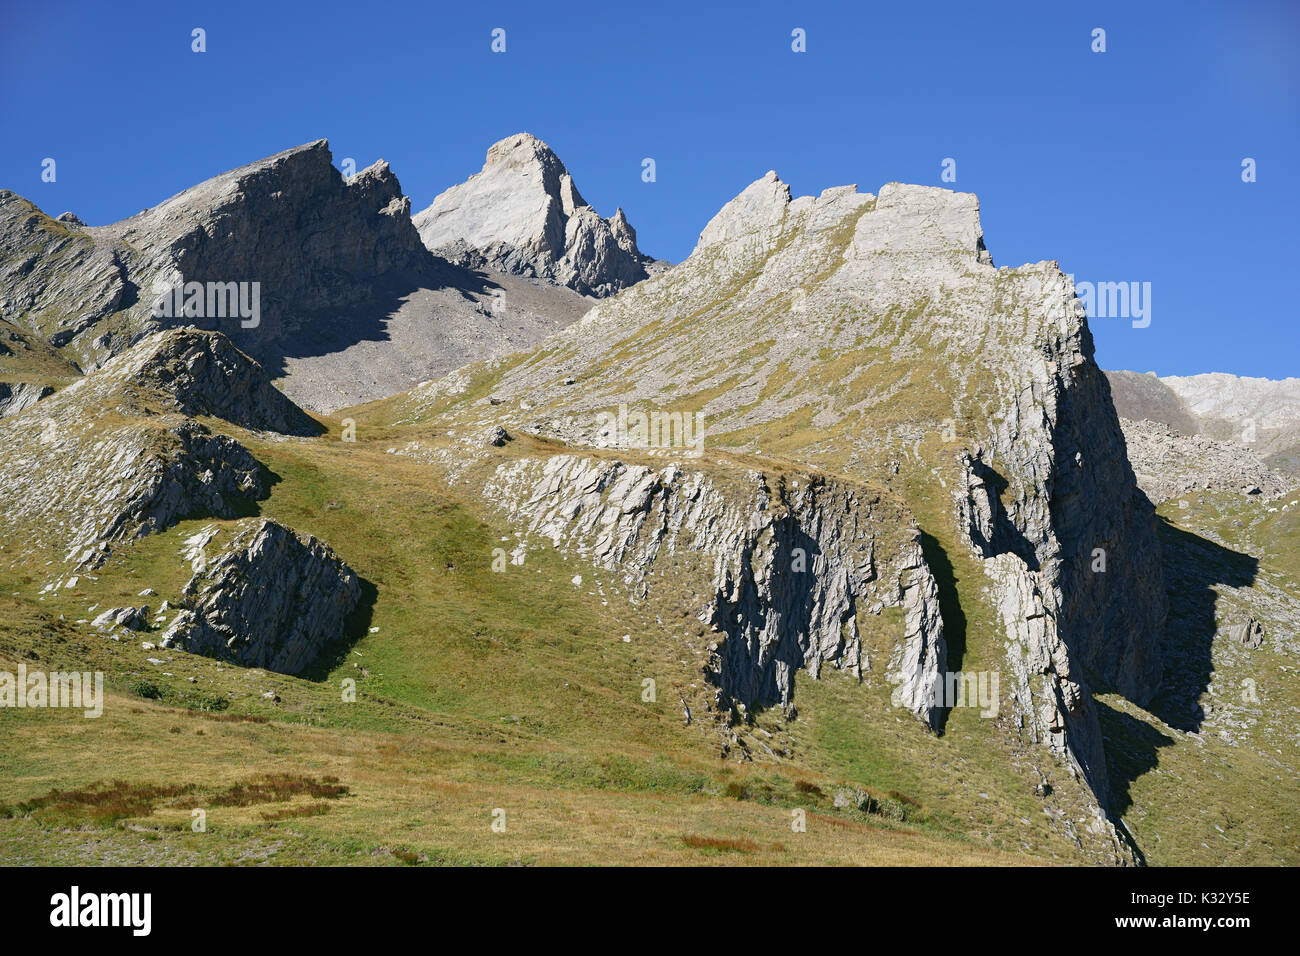 Rugged landscape on the Italian side of Pic d'Asti (3219m amsl) in summer. Chianale, Province of Cuneo, Piedmont, Italy. Stock Photo